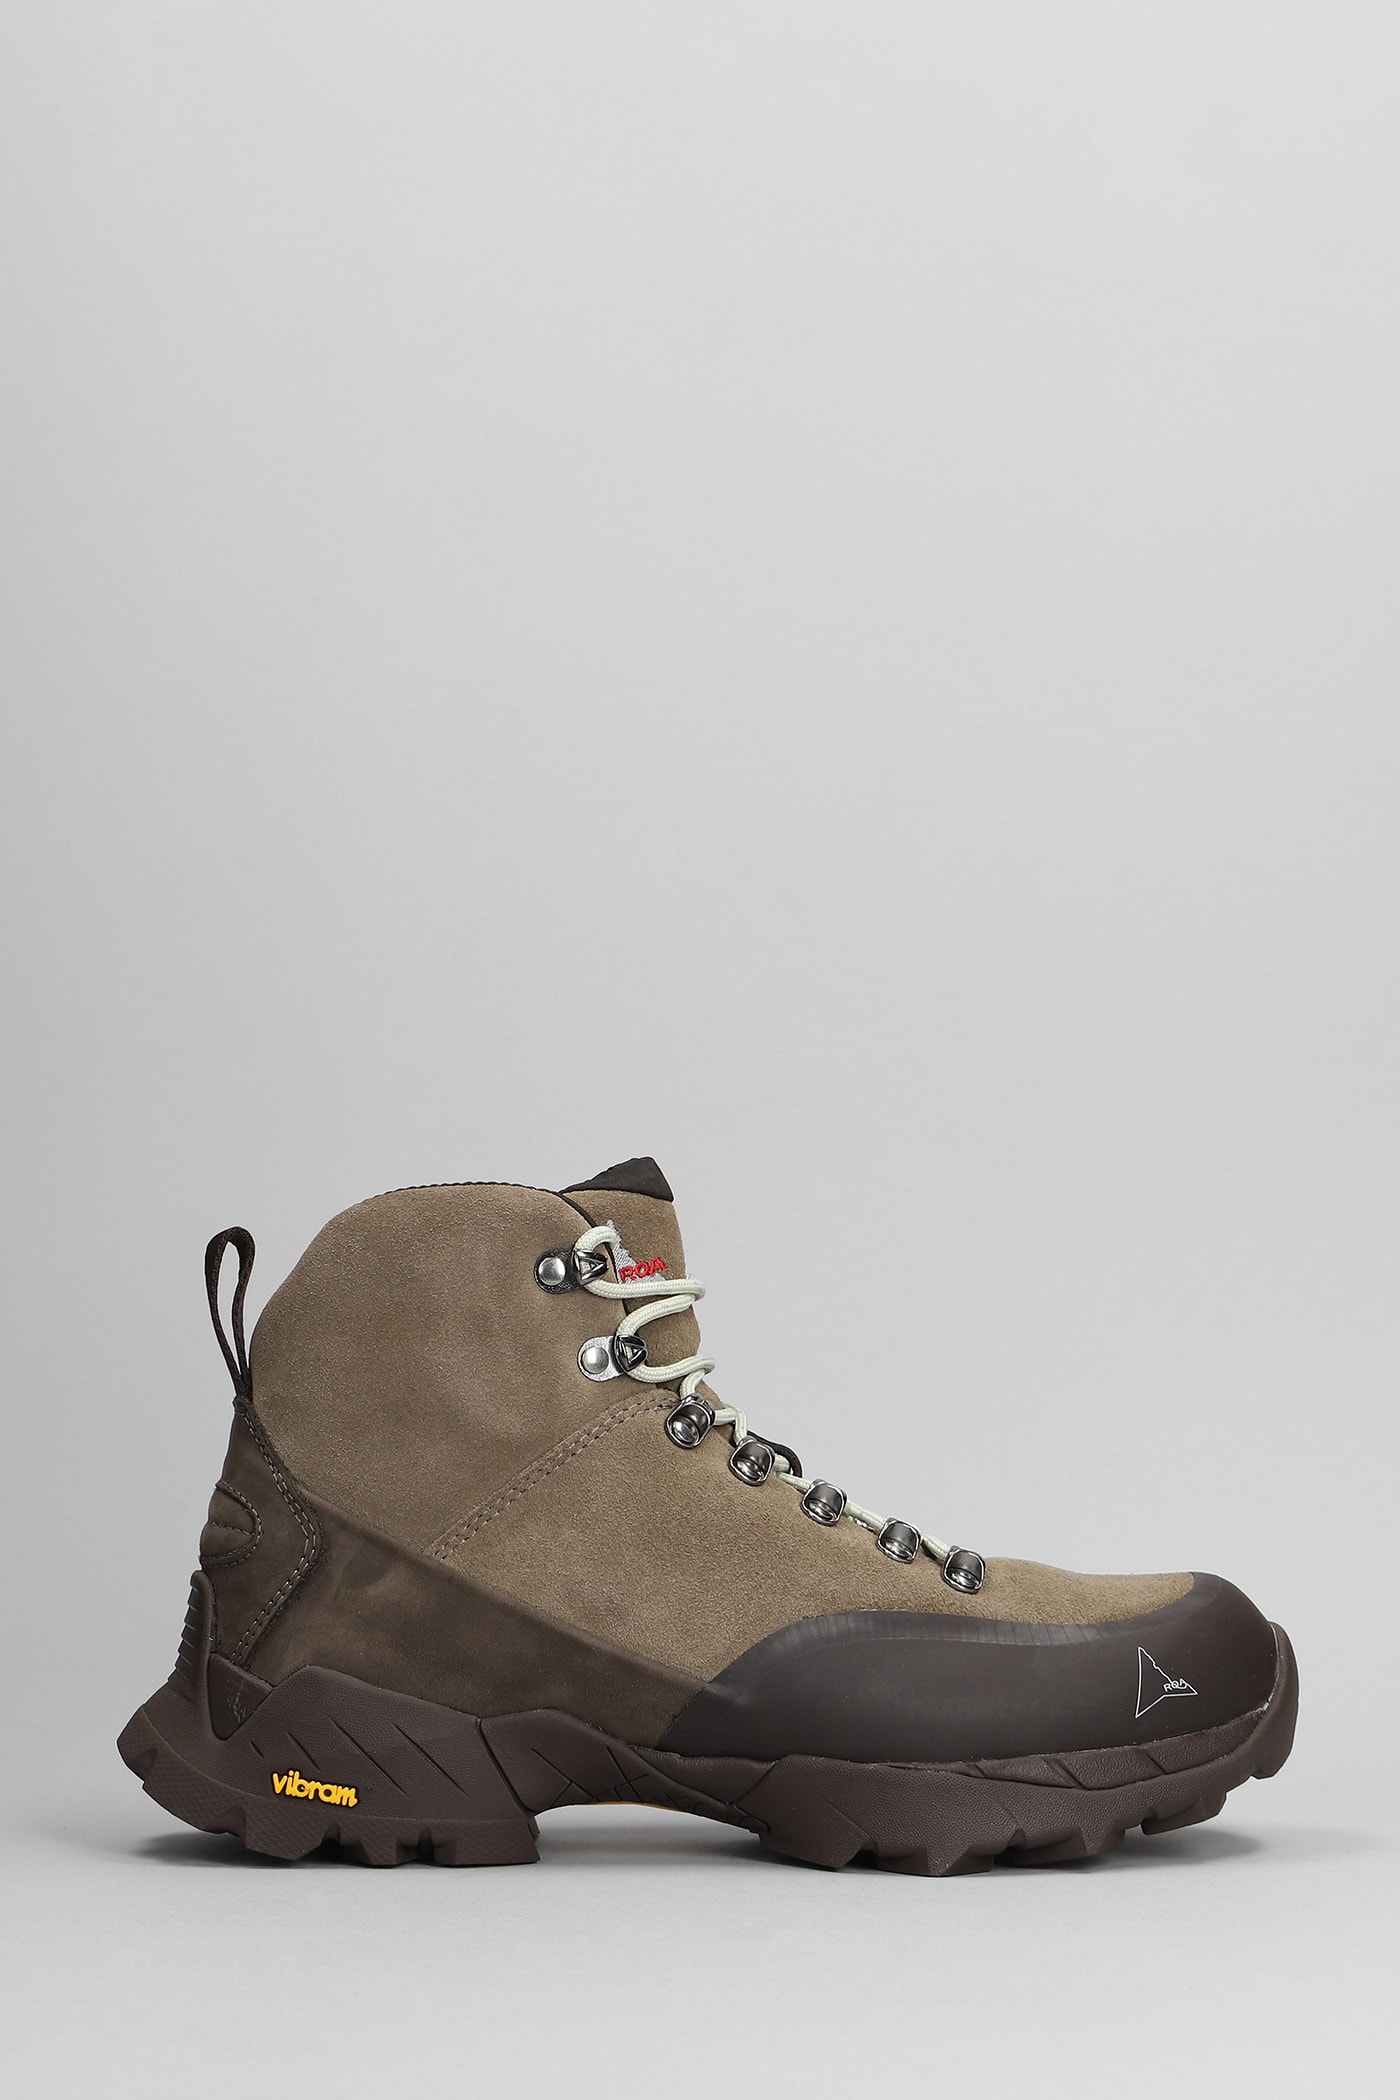 ROA ANDREAS COMBAT BOOTS IN TAUPE SUEDE